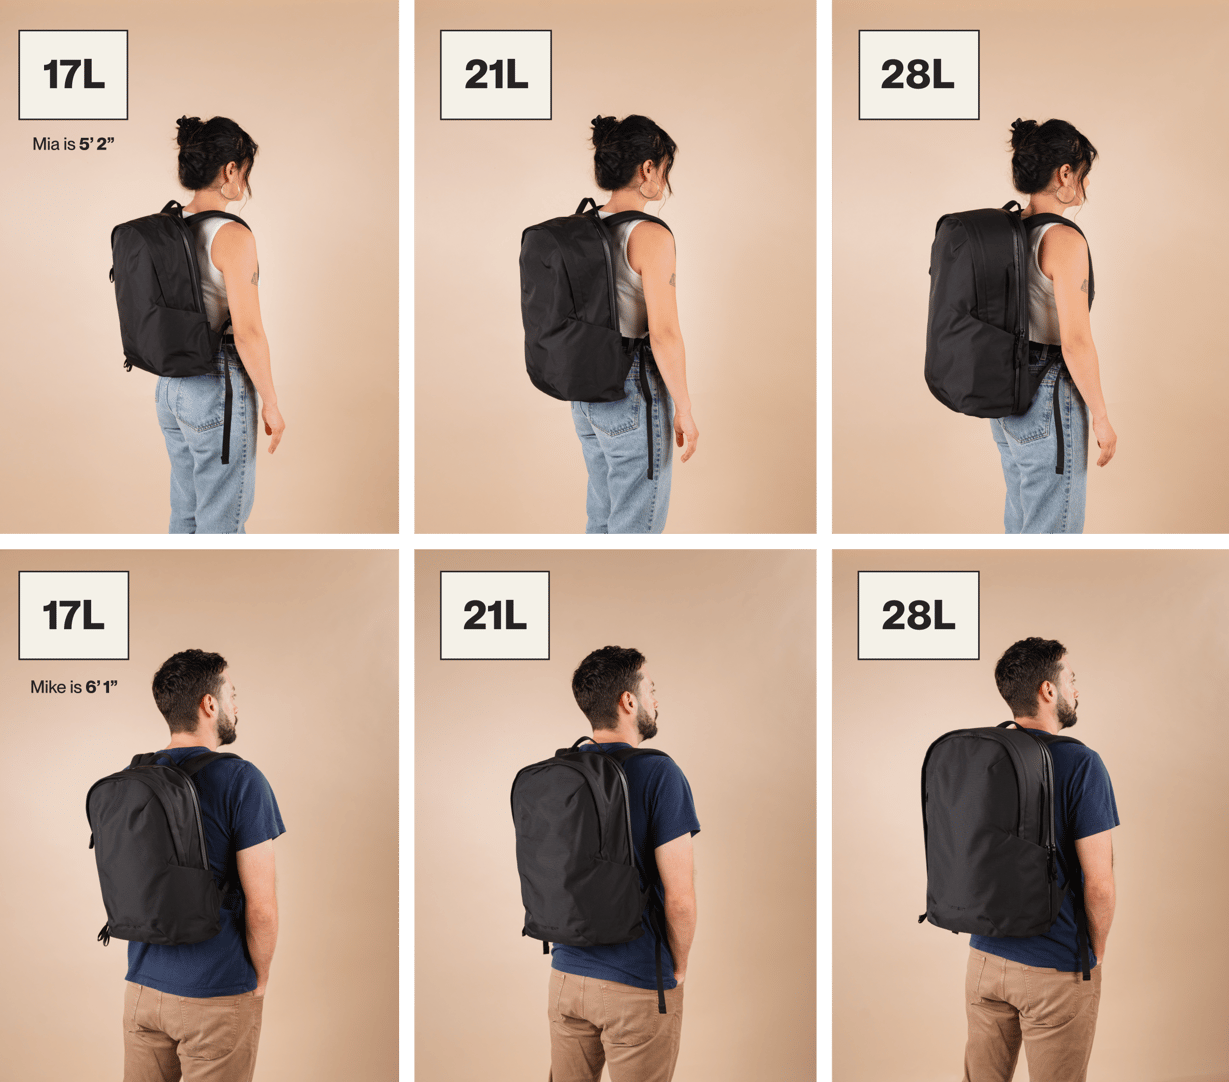 The Everything Backpack Review  Best Bag for Work, Travel,… - Moment